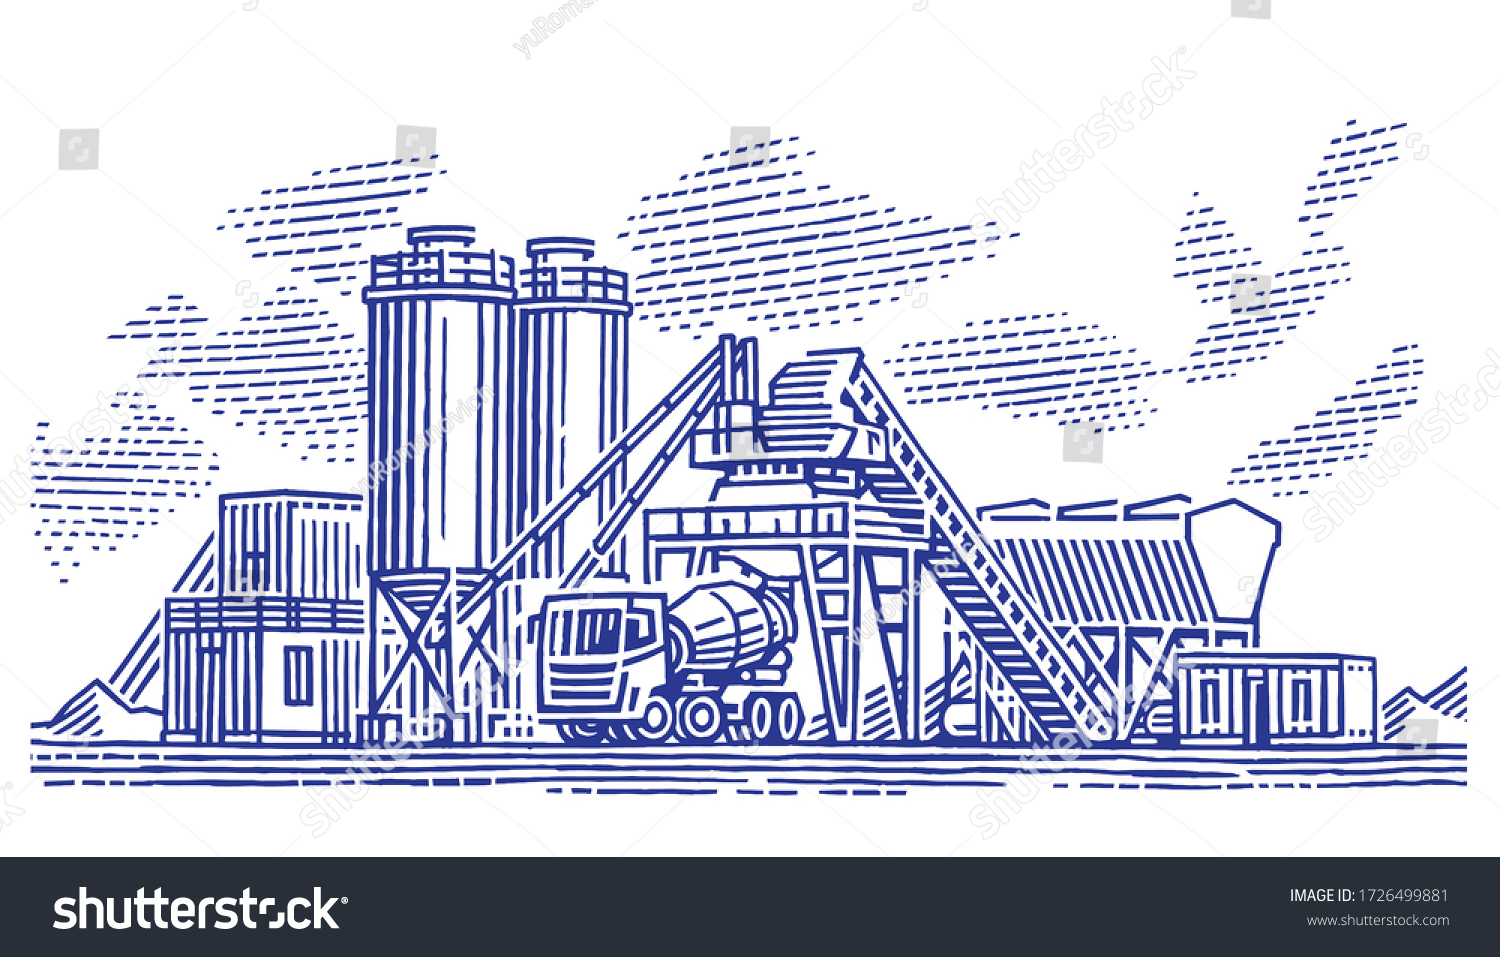 SVG of Concrete batching plant/cement mixing silo monochrome illustration, isolated, vector. svg